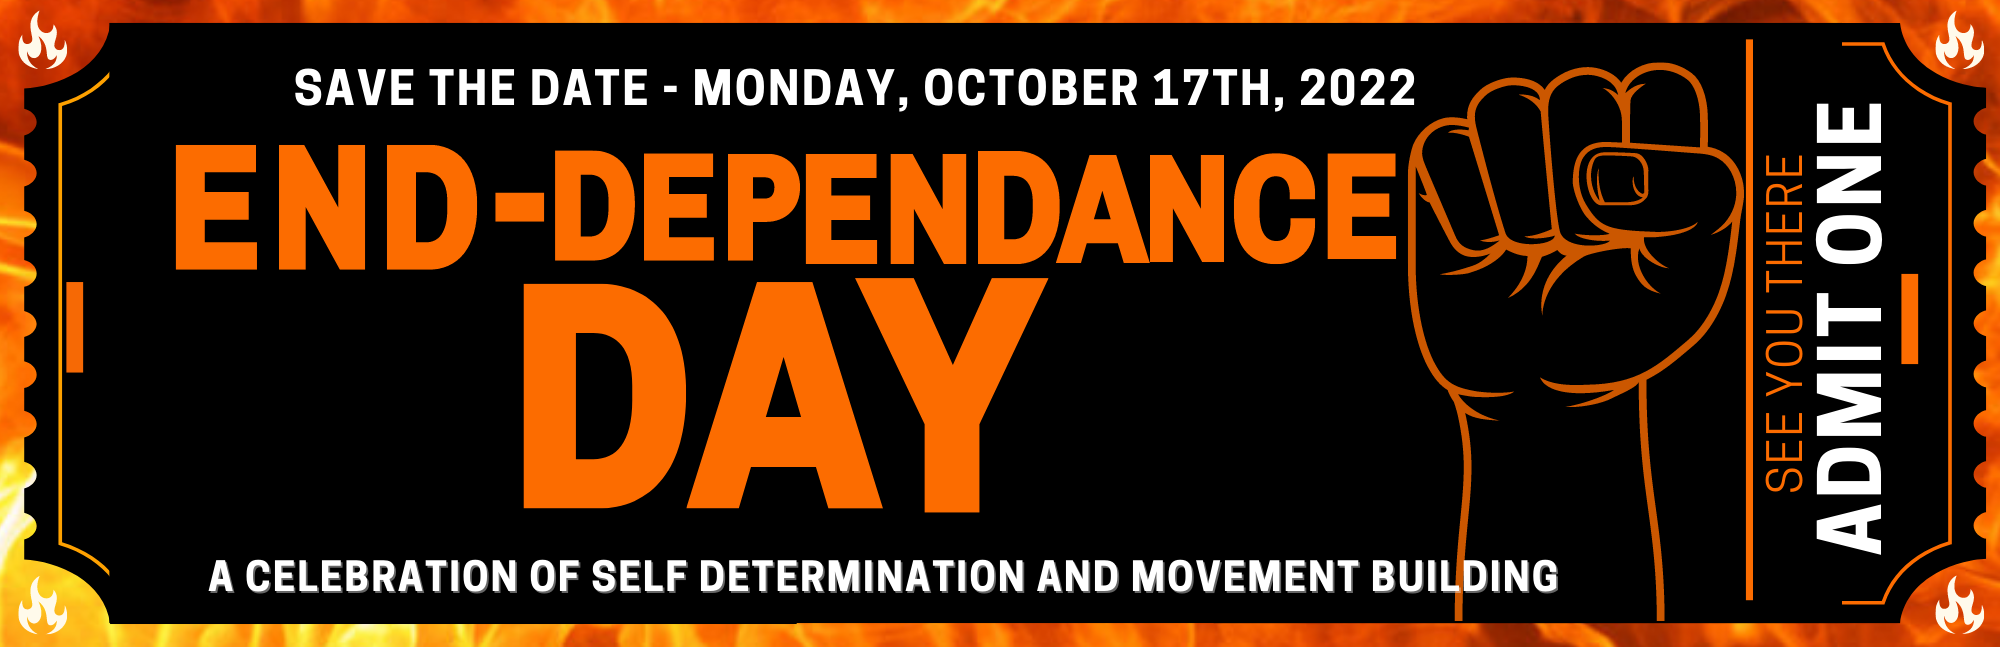 End-Dependence Day 2022